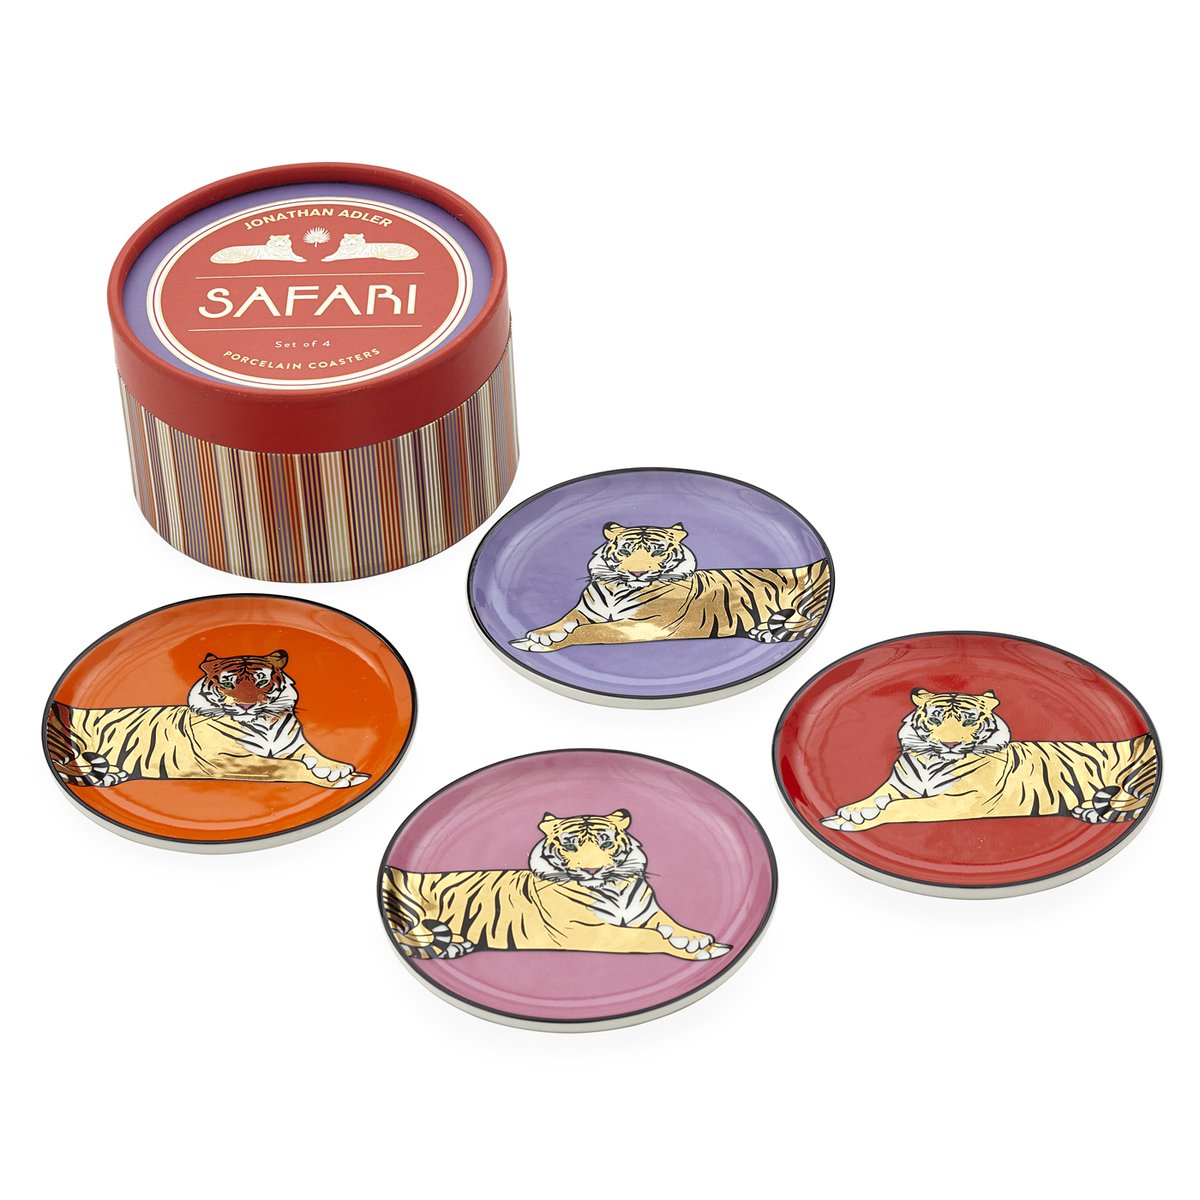 Safari Gold Accent Coasters S/4 by Jonathan Adler